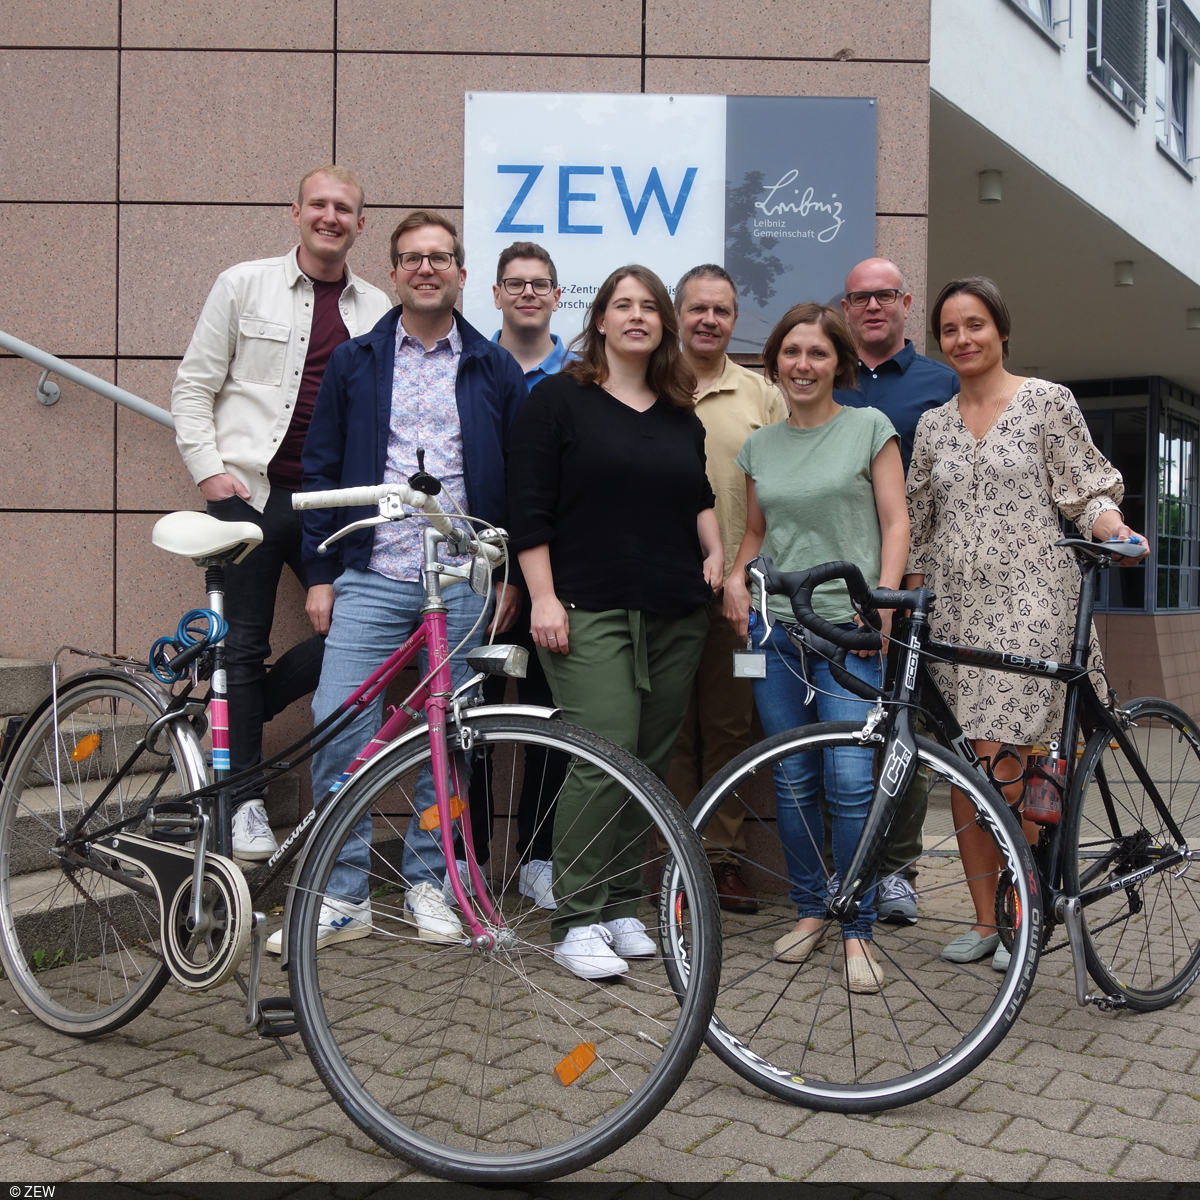 Group picture of some participants of the City Cycling Team in front of the ZEW building